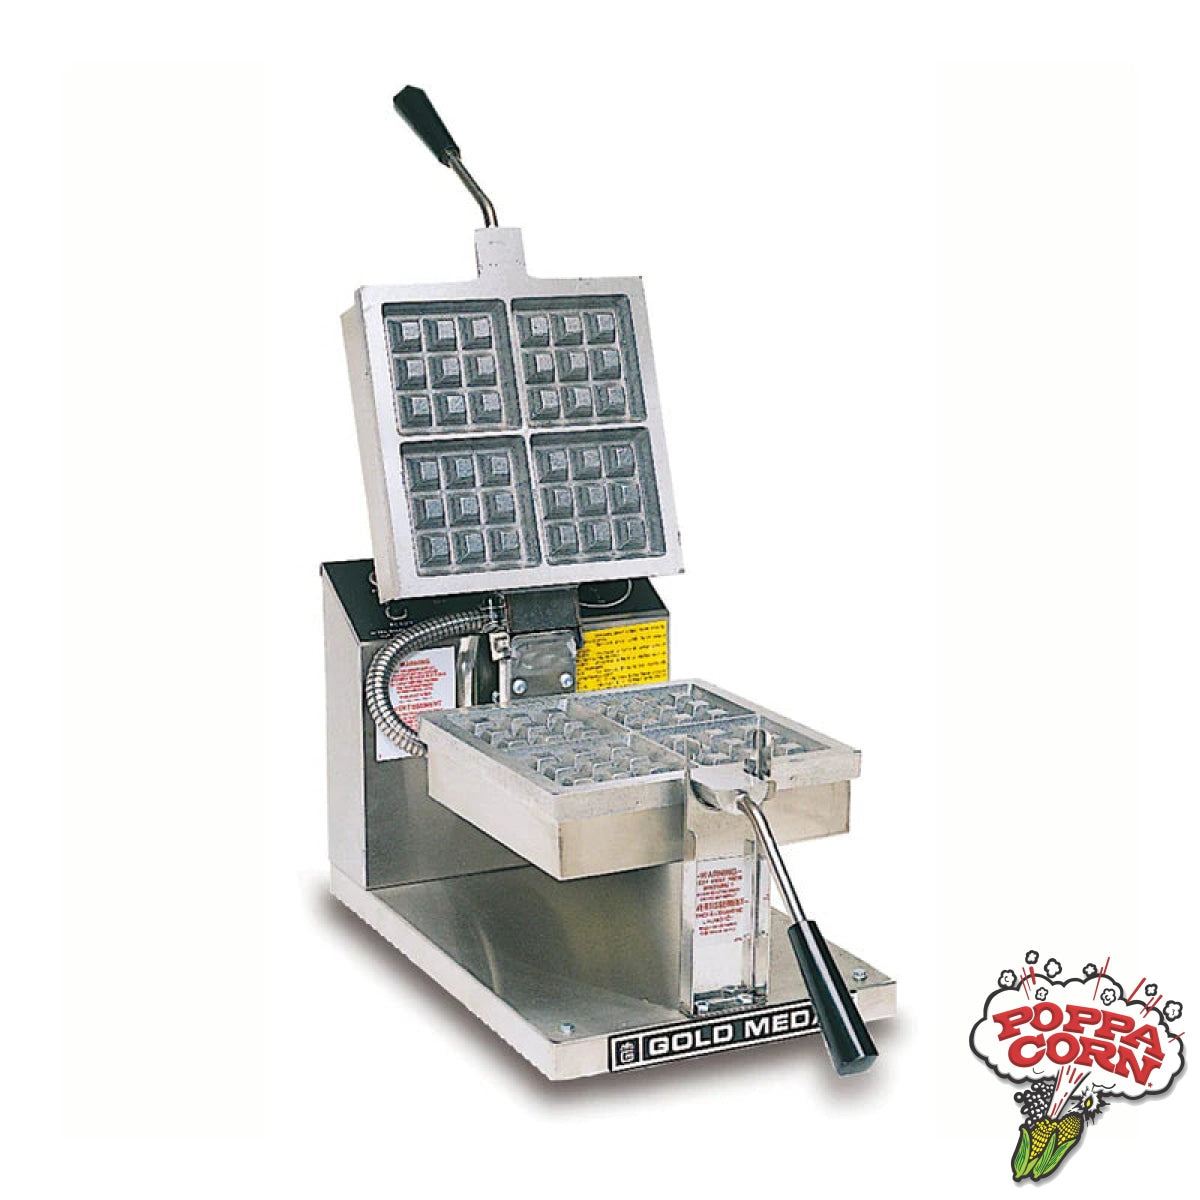 Four-Square Belgian Waffle Baker with Non-stick Coating and Electronic Controls - GM5024ET - Poppa Corn Corp